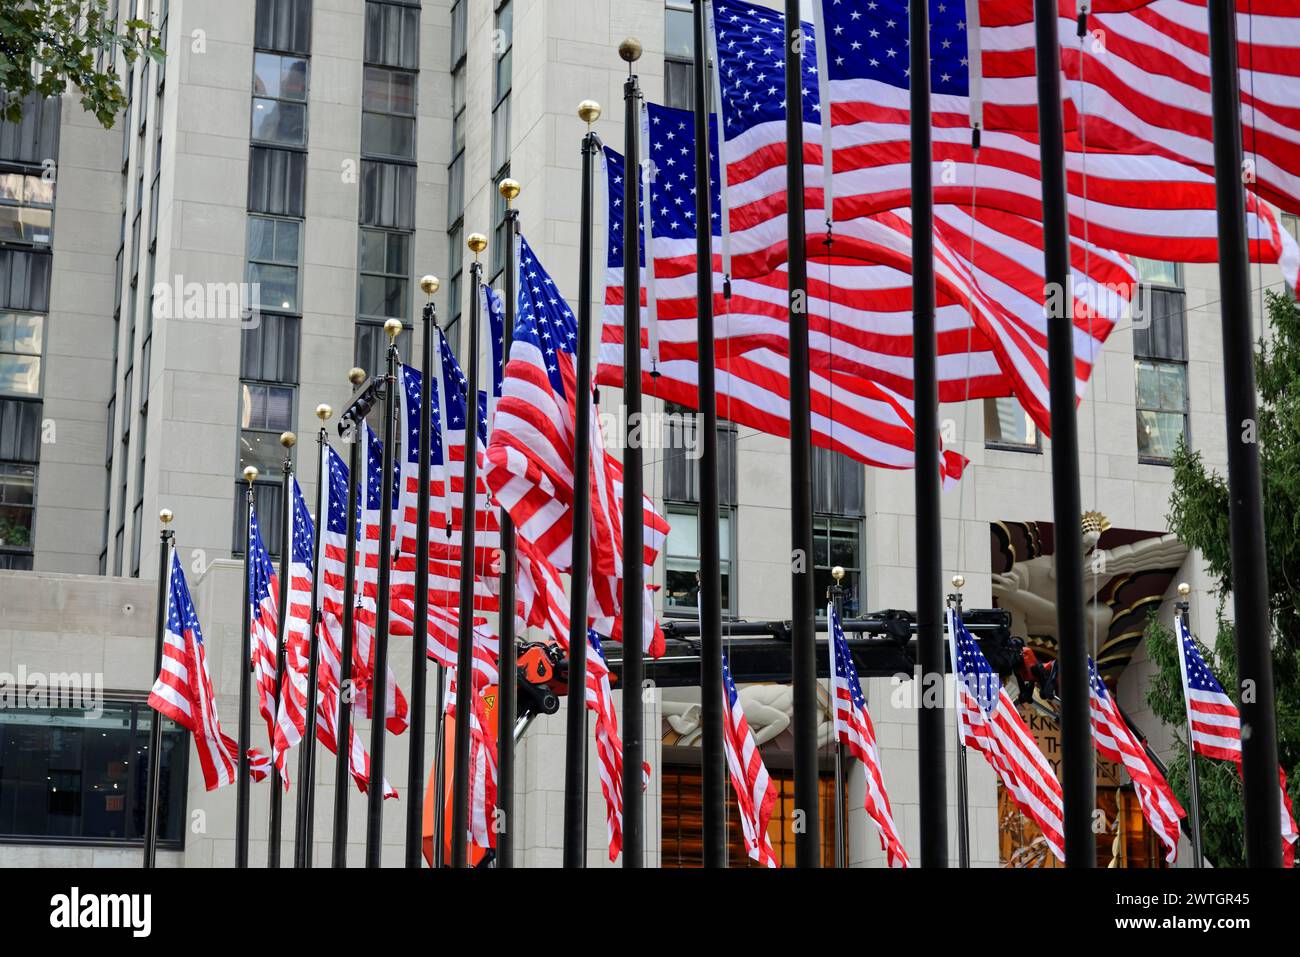 Rockfeller Center, Several American flags in front of a building, waving in the wind and showing patriotism, Manhattan, New York City, New York, USA Stock Photo